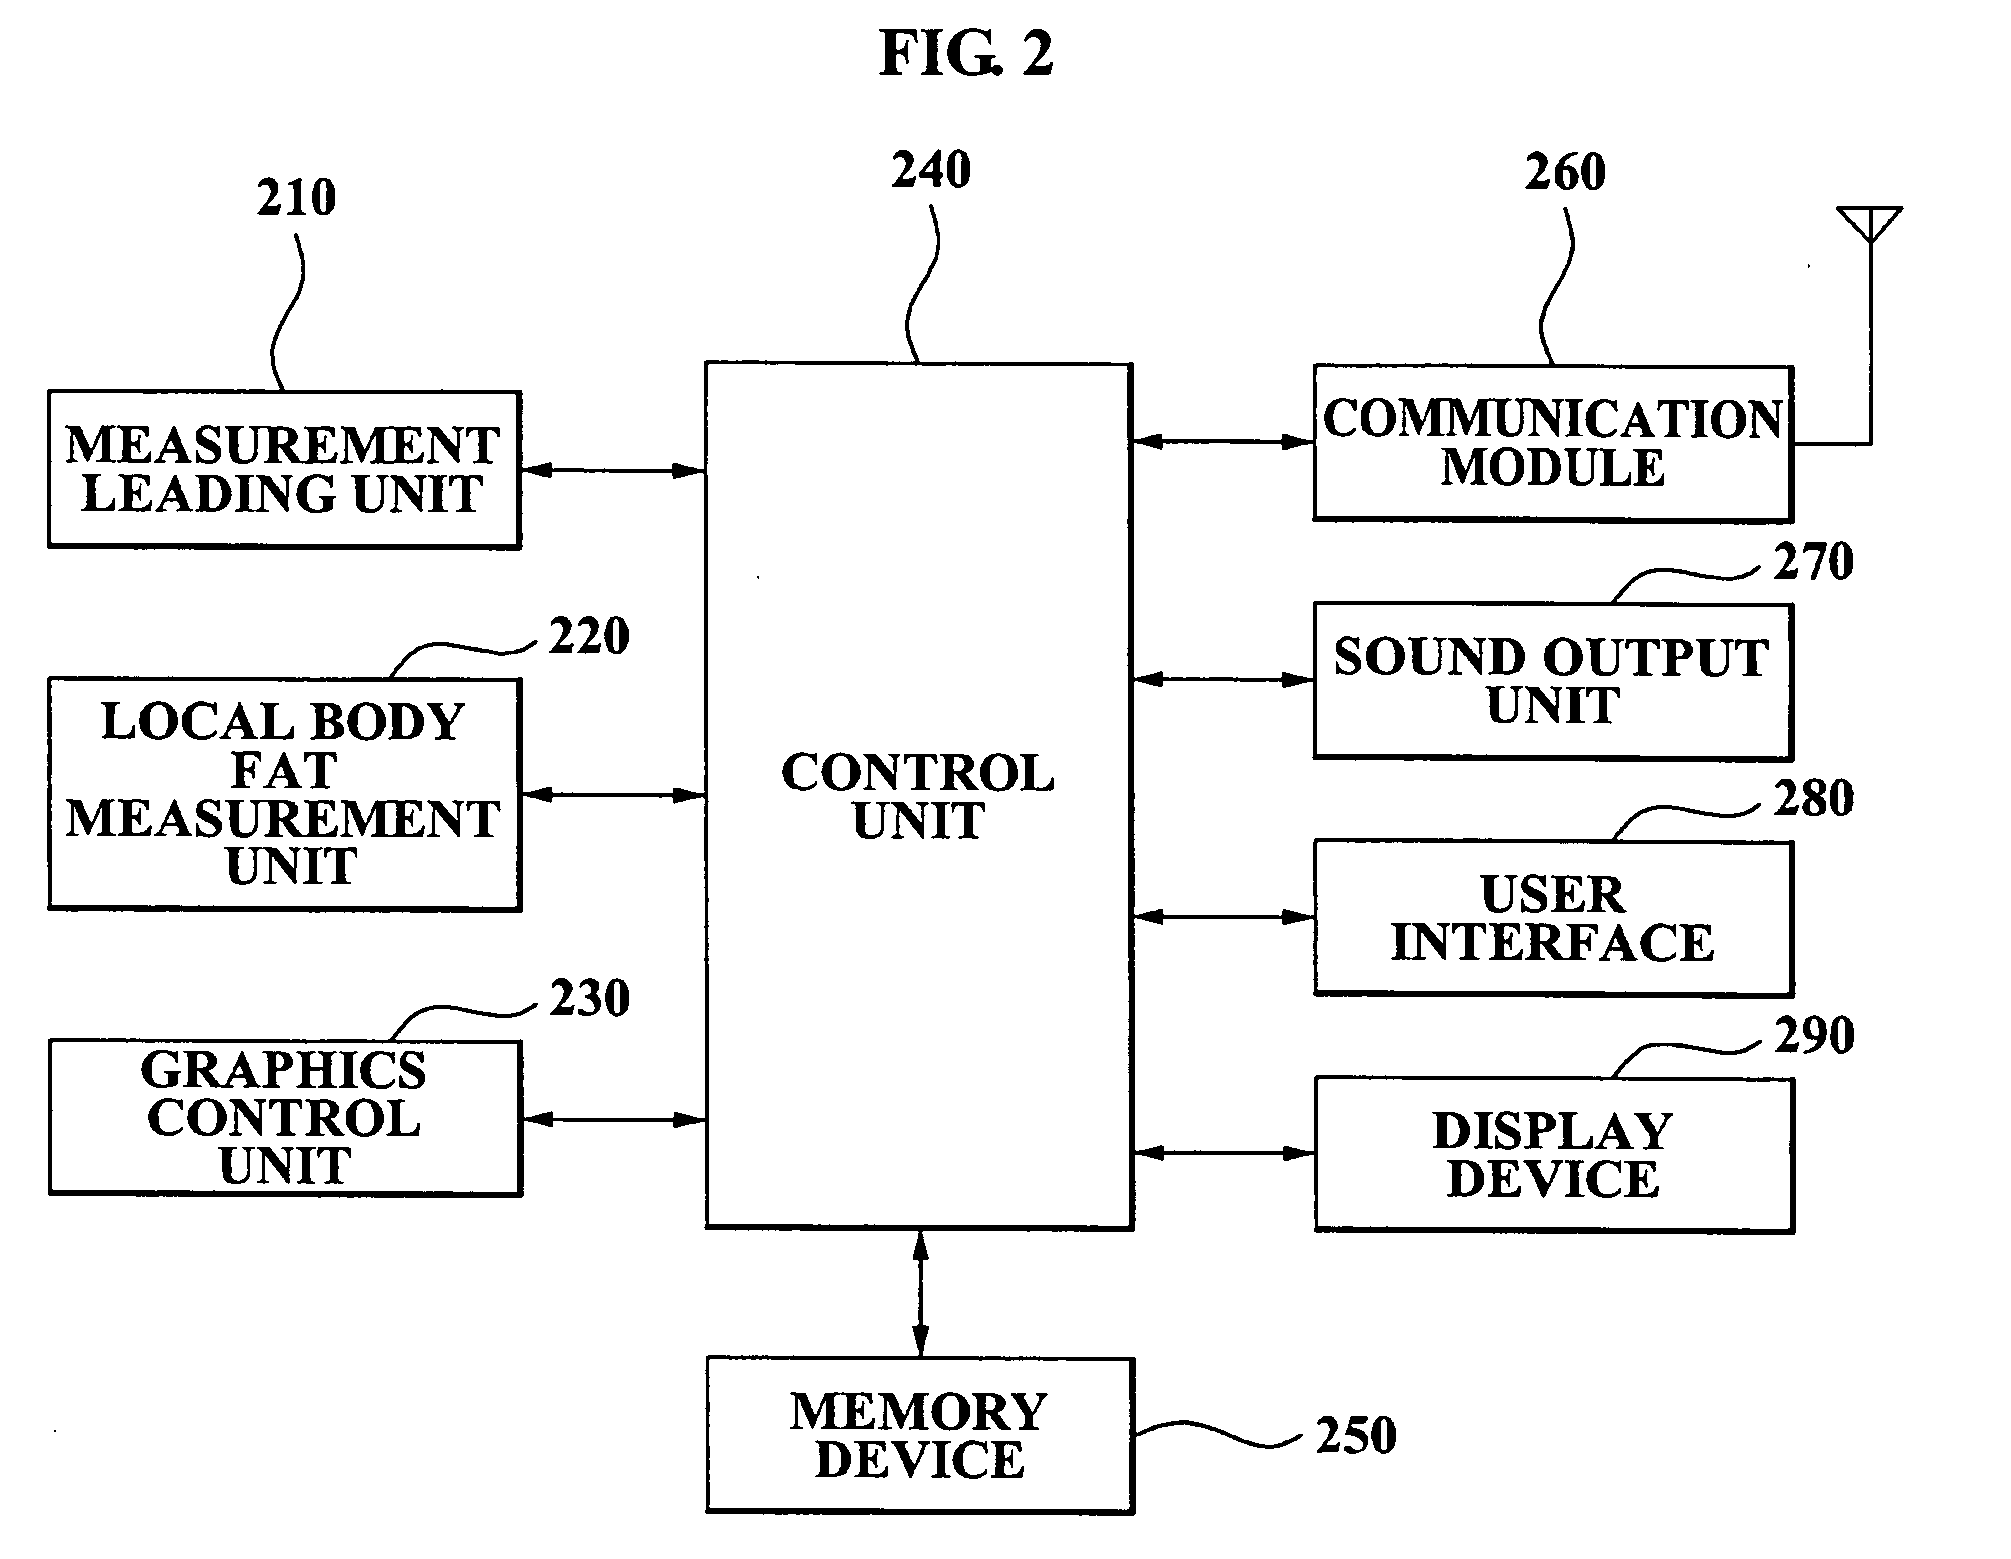 Local body fat measurement device and method of operating the same